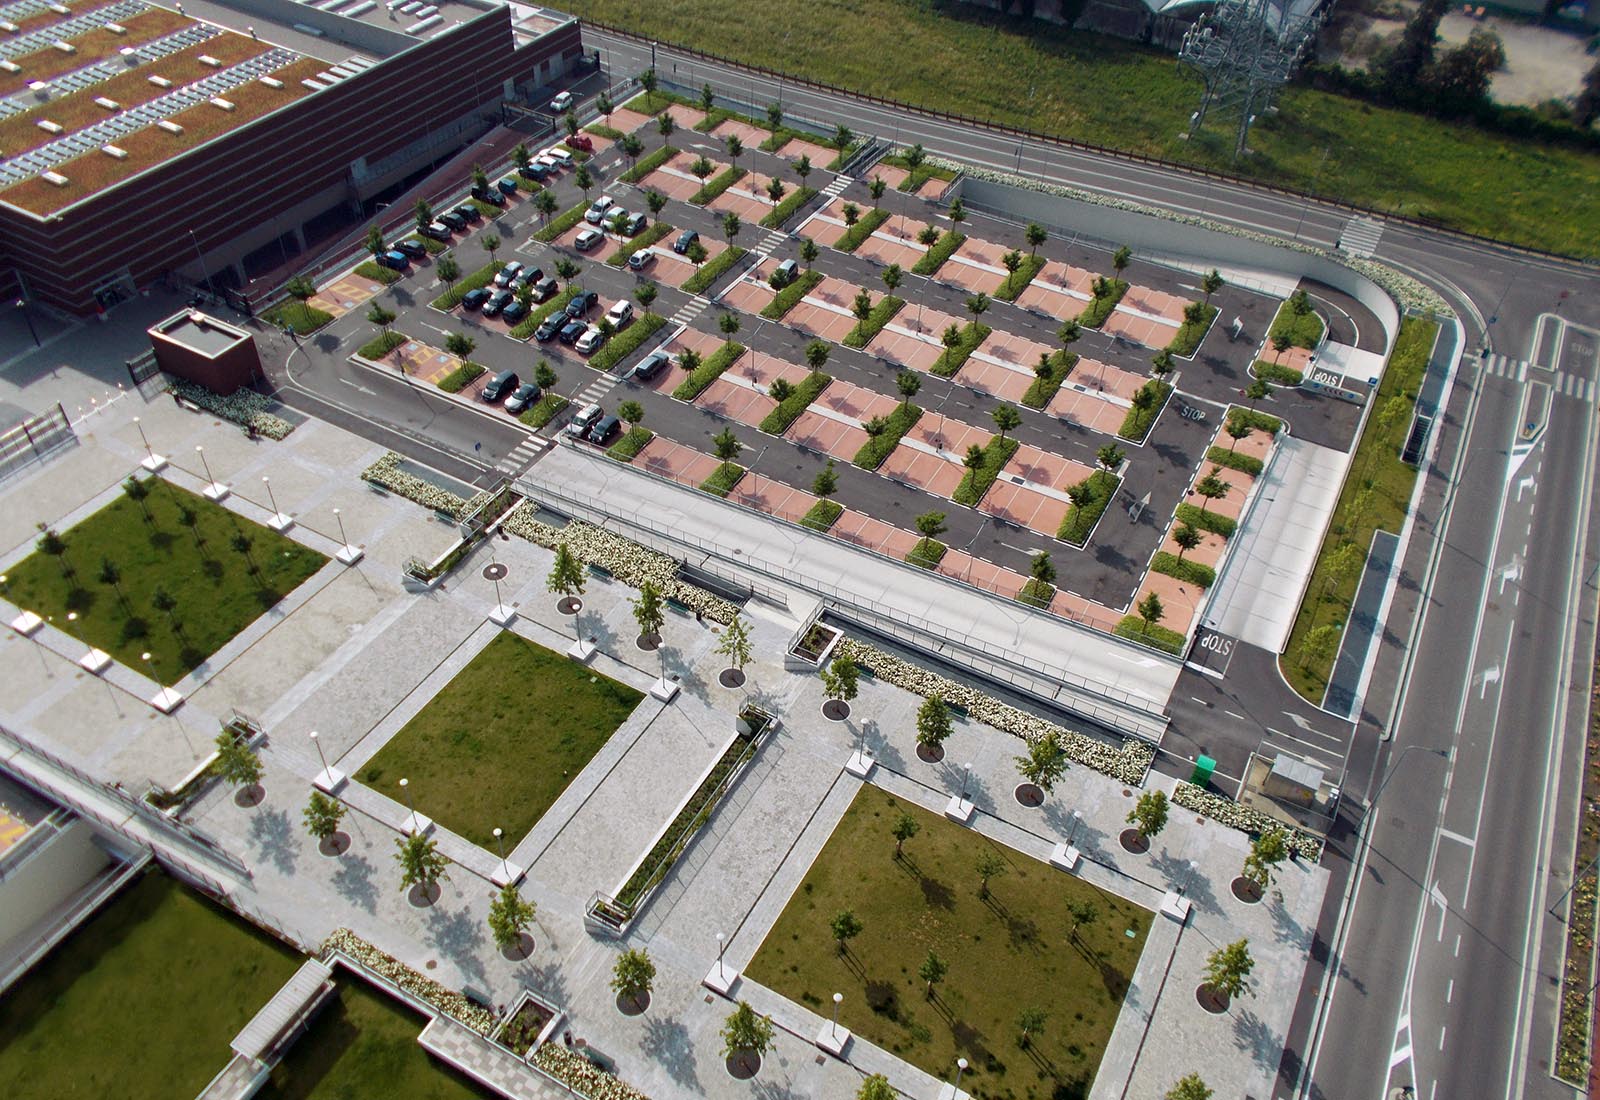 Square and parking lots in Adriano area Milan - The square and the south parking lot 